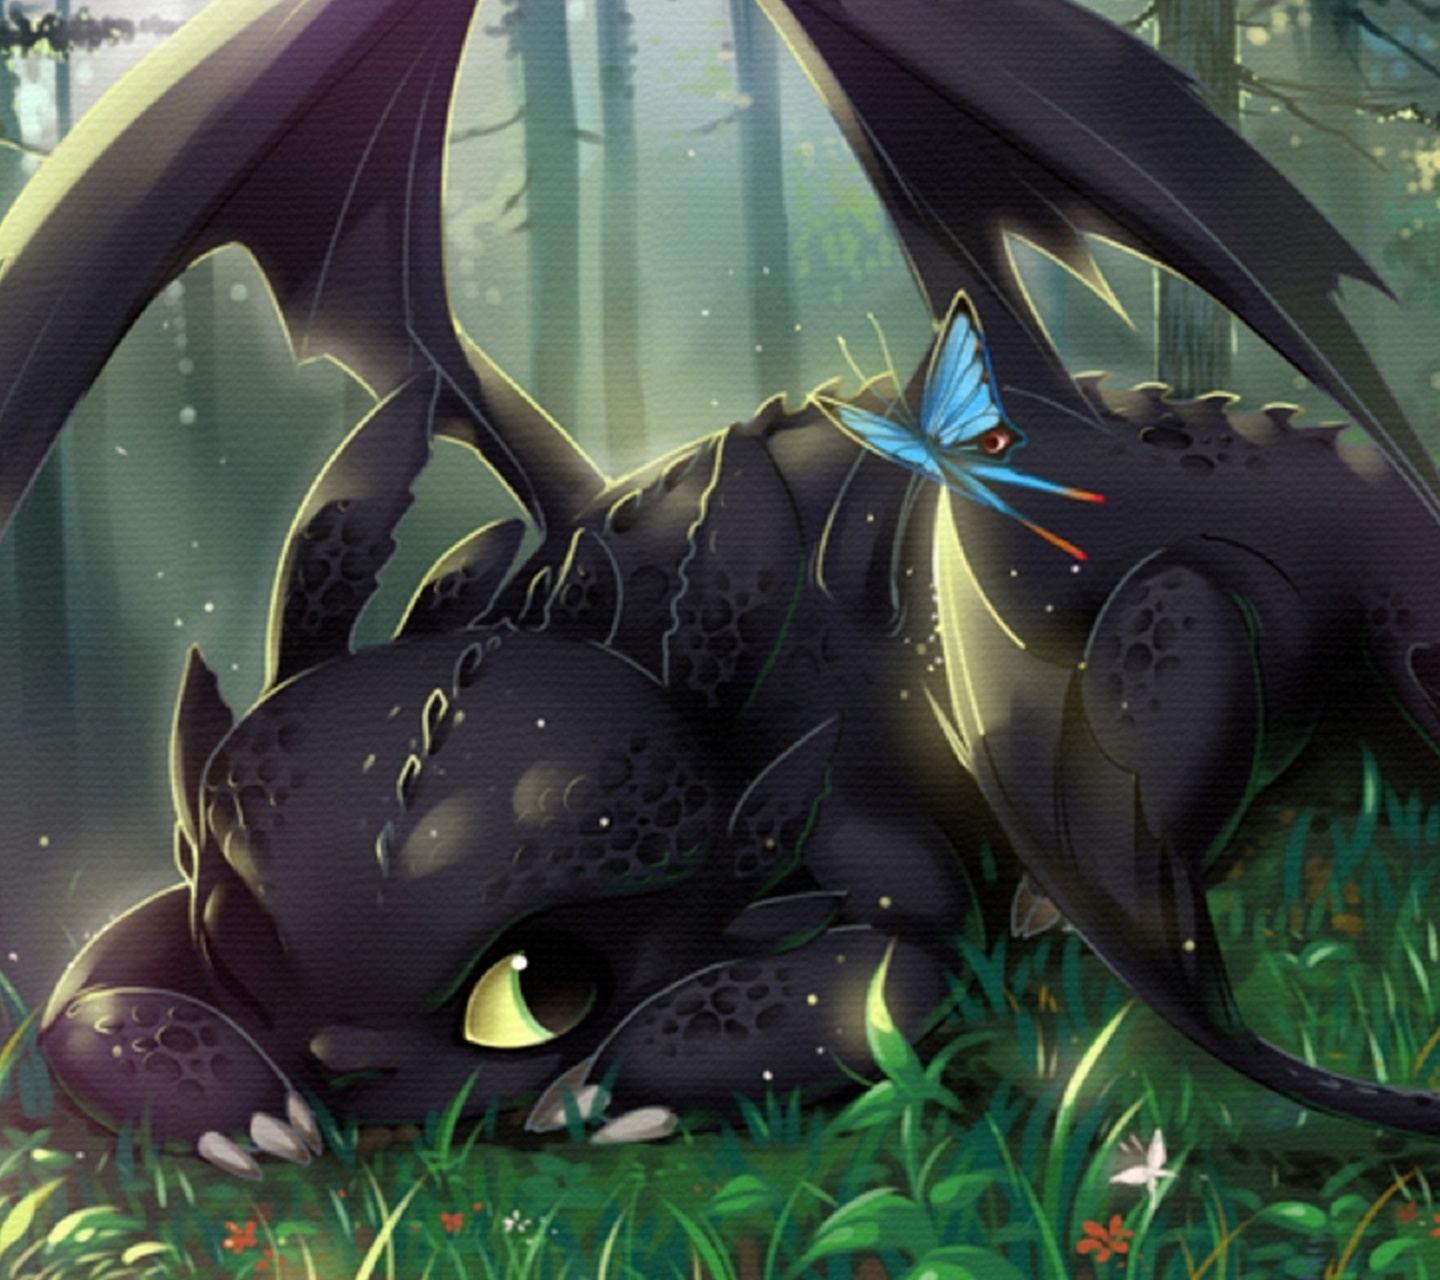 I Love Toothless H2tyd2 The Game Huntress